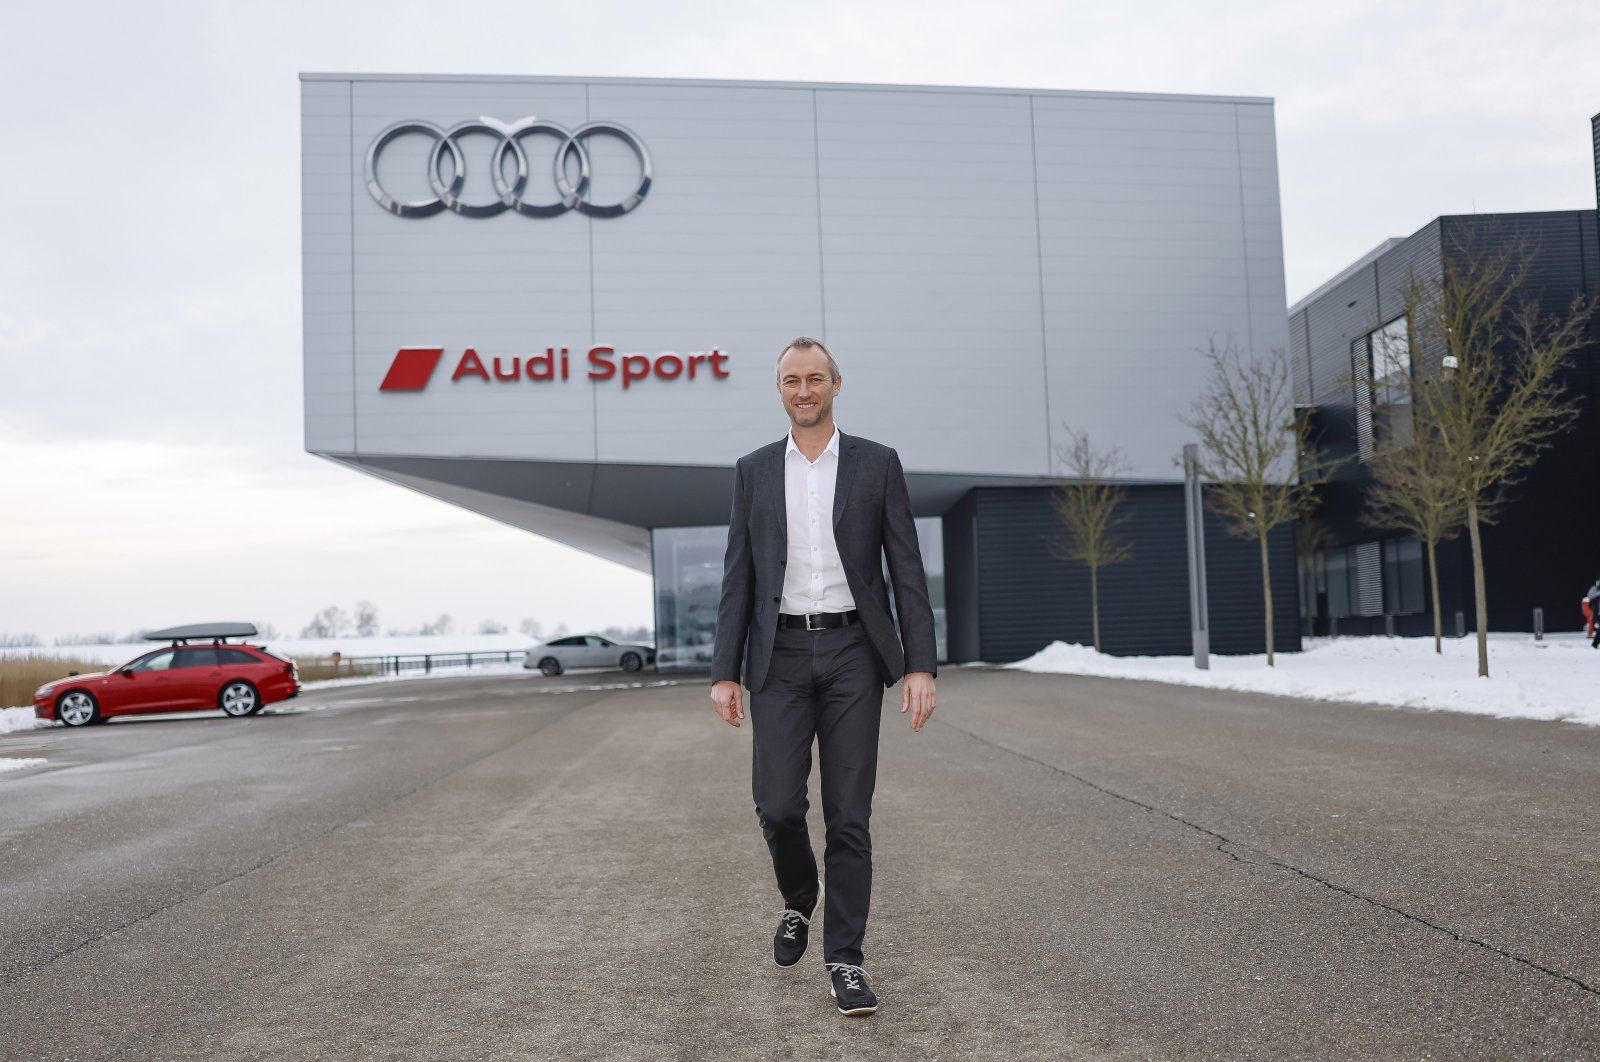 Formula 1 Project Manager at Audi and Managing Director of Audi Formula Racing GmbH Adam Baker stands in front of the Audi Sport building, Bavaria, Germany, Dec. 19, 2022. (Getty Images Photo)